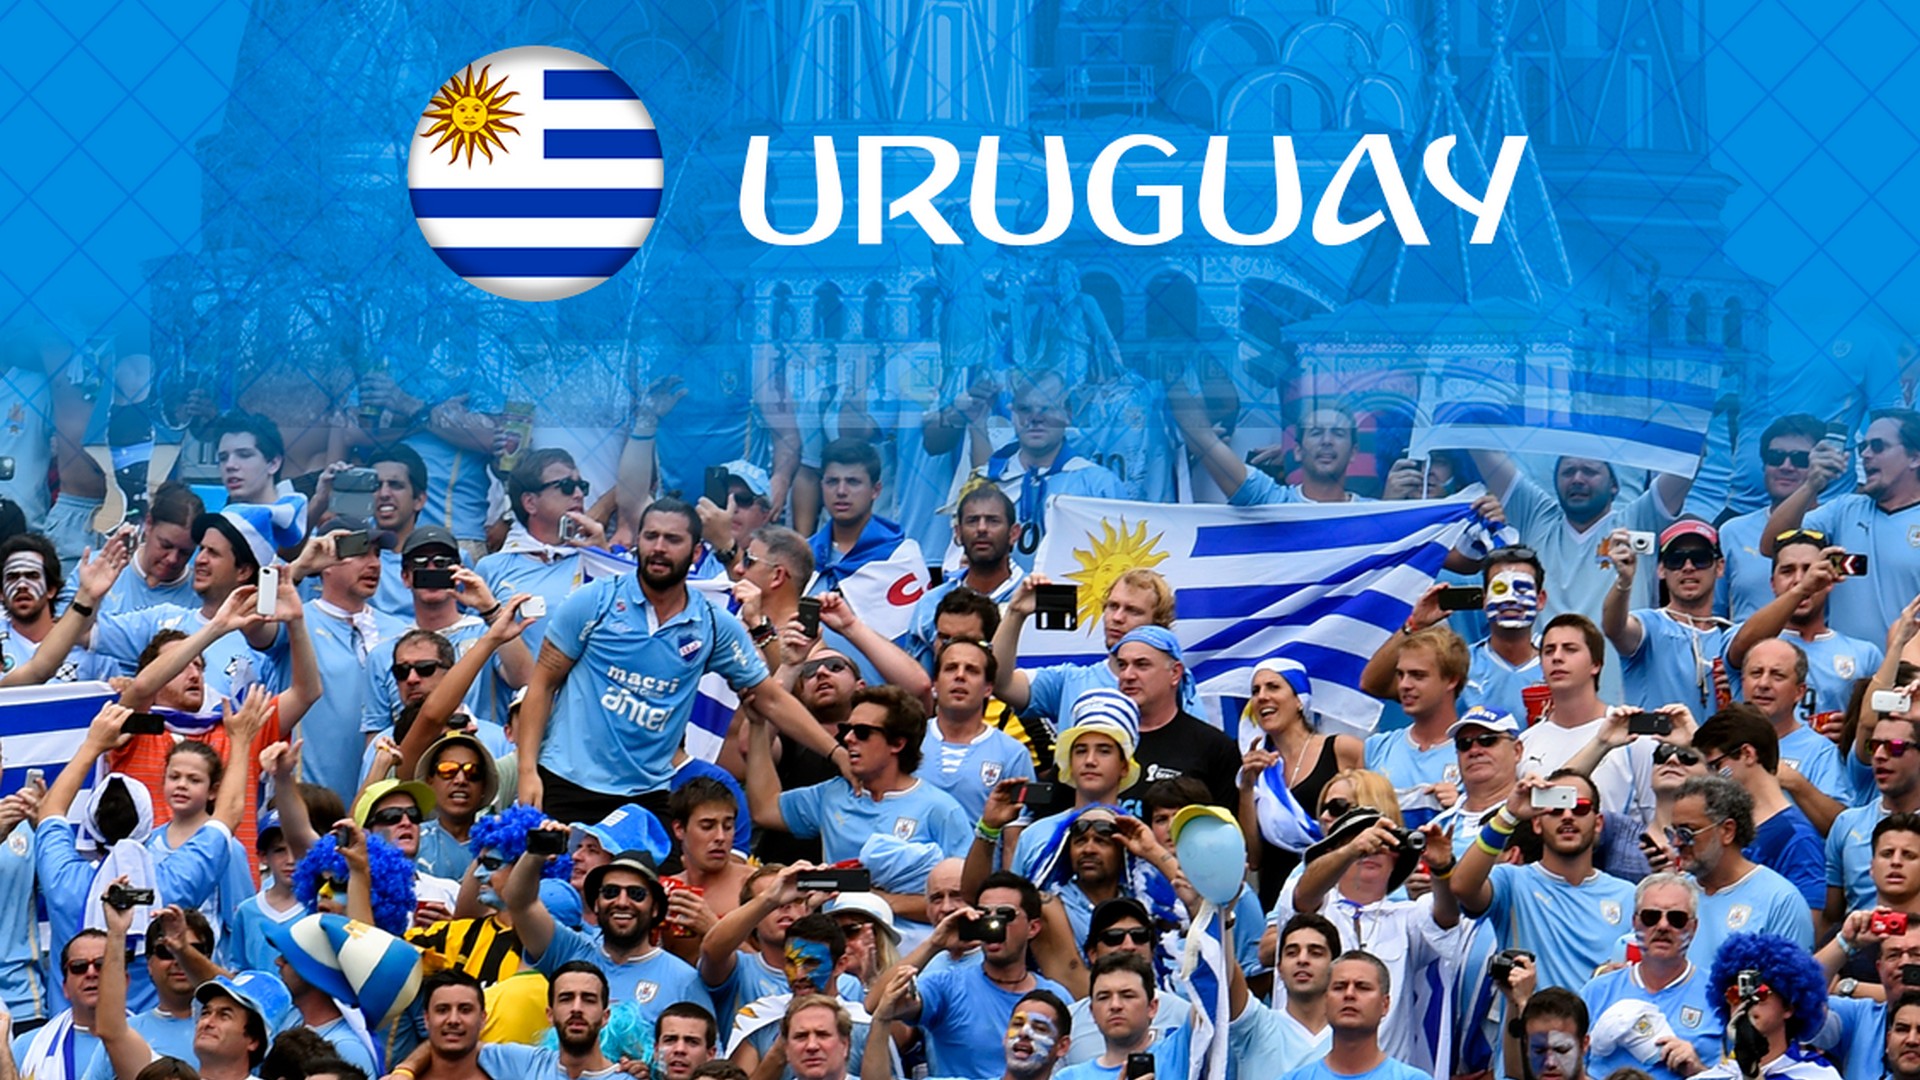 Uruguay National Team Background Wallpaper HD with image resolution 1920x1080 pixel. You can make this wallpaper for your Desktop Computer Backgrounds, Mac Wallpapers, Android Lock screen or iPhone Screensavers